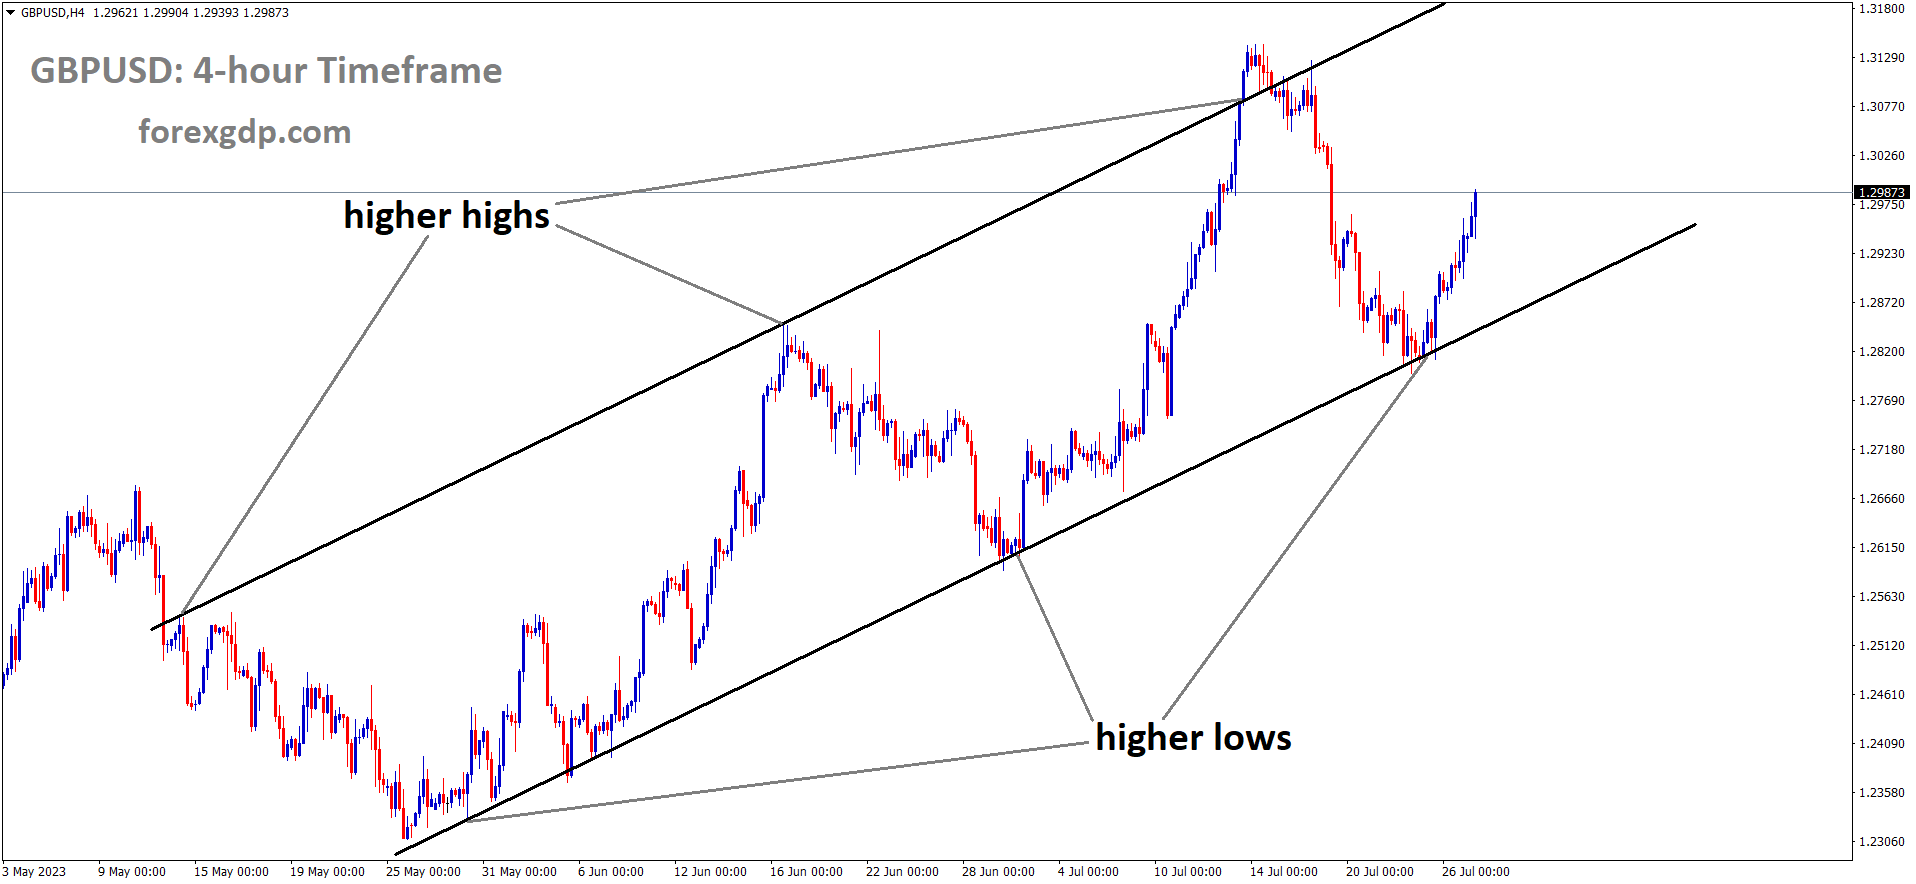 GBPUSD is moving in an Ascending channel and the market has rebounded from the higher low area of the channel 2